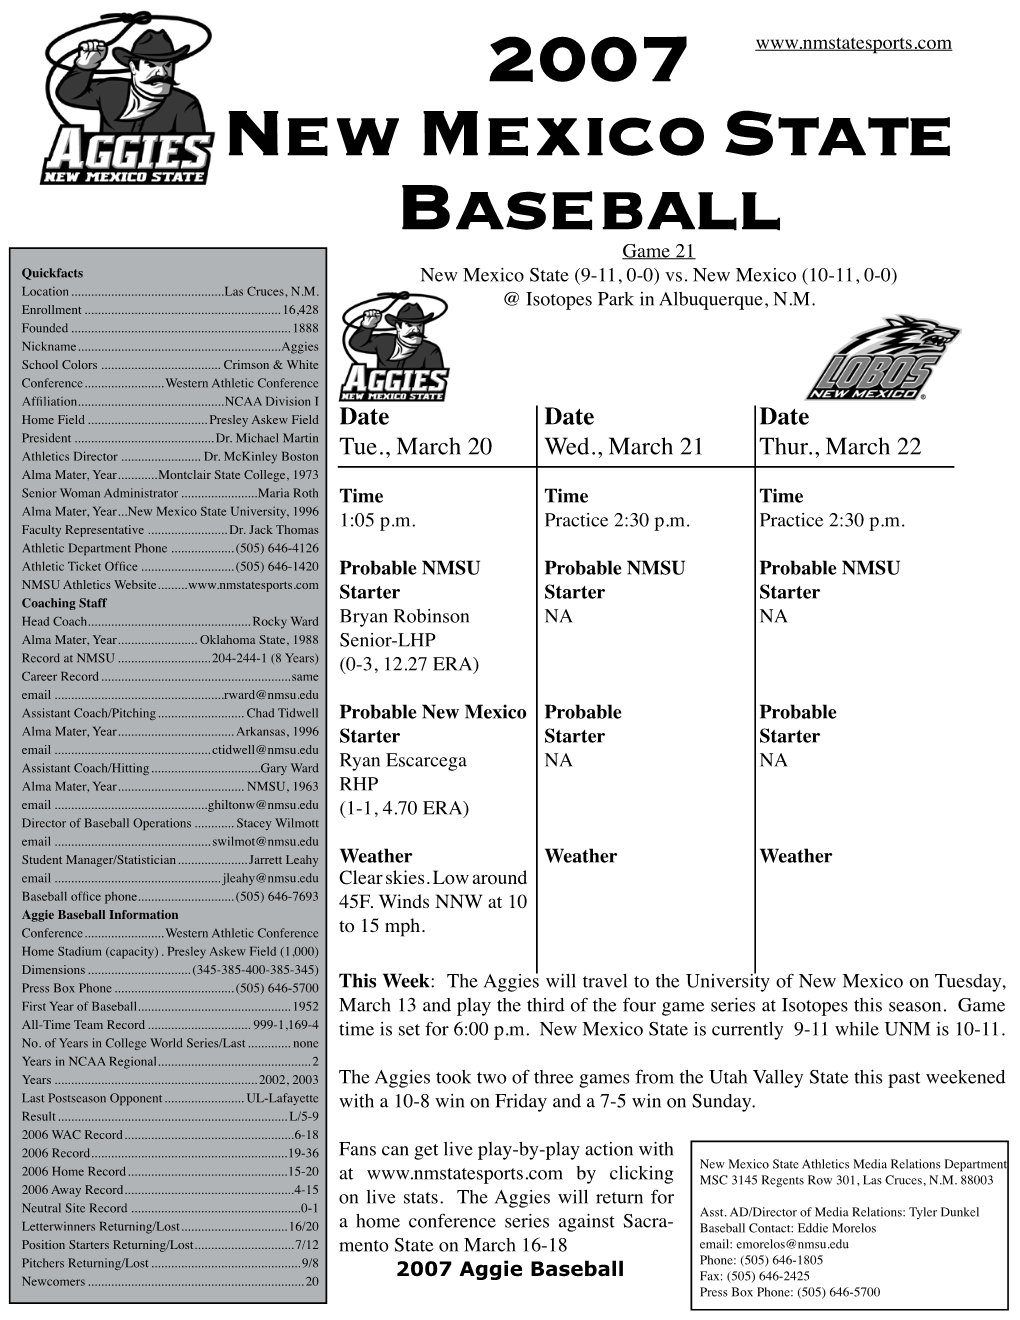 2007 New Mexico State Baseball